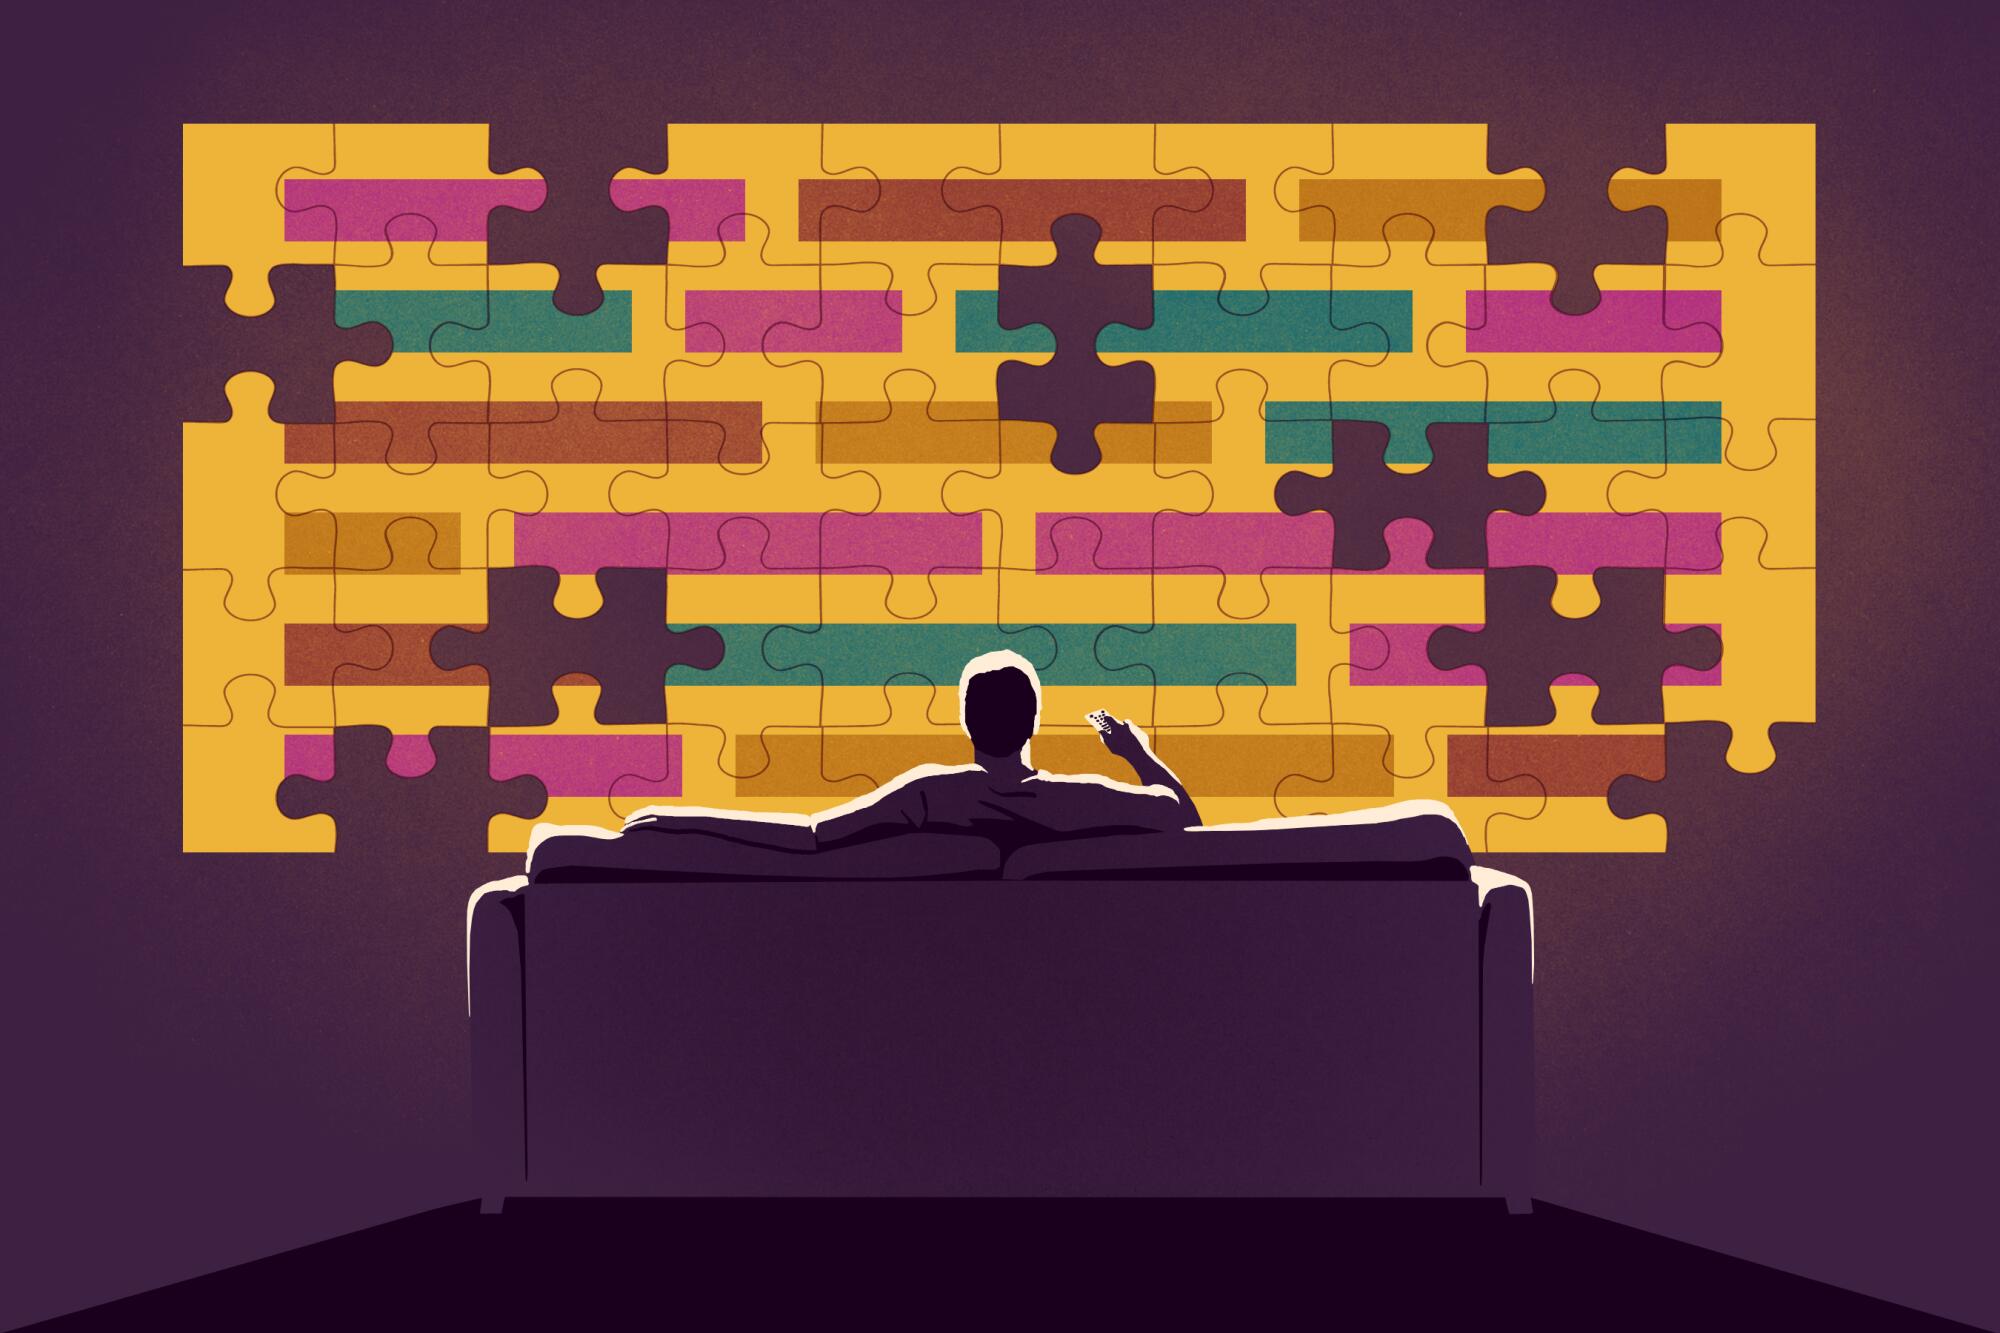 Illustration of a man sitting on a couch and pointing a remote at a puzzle on the wall.